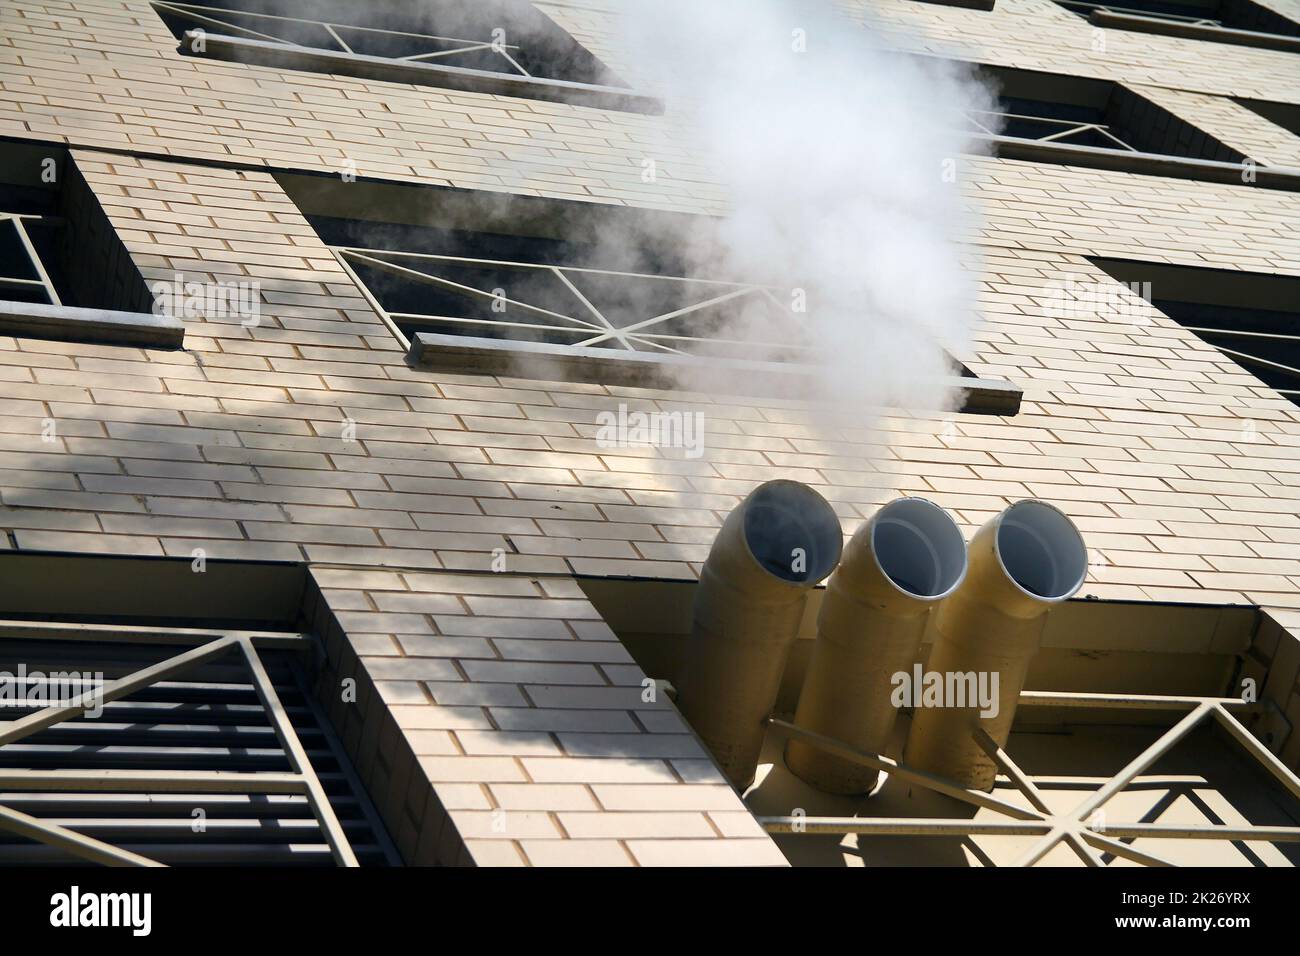 A white steam exhaust from three chimney out of a brick building Stock Photo